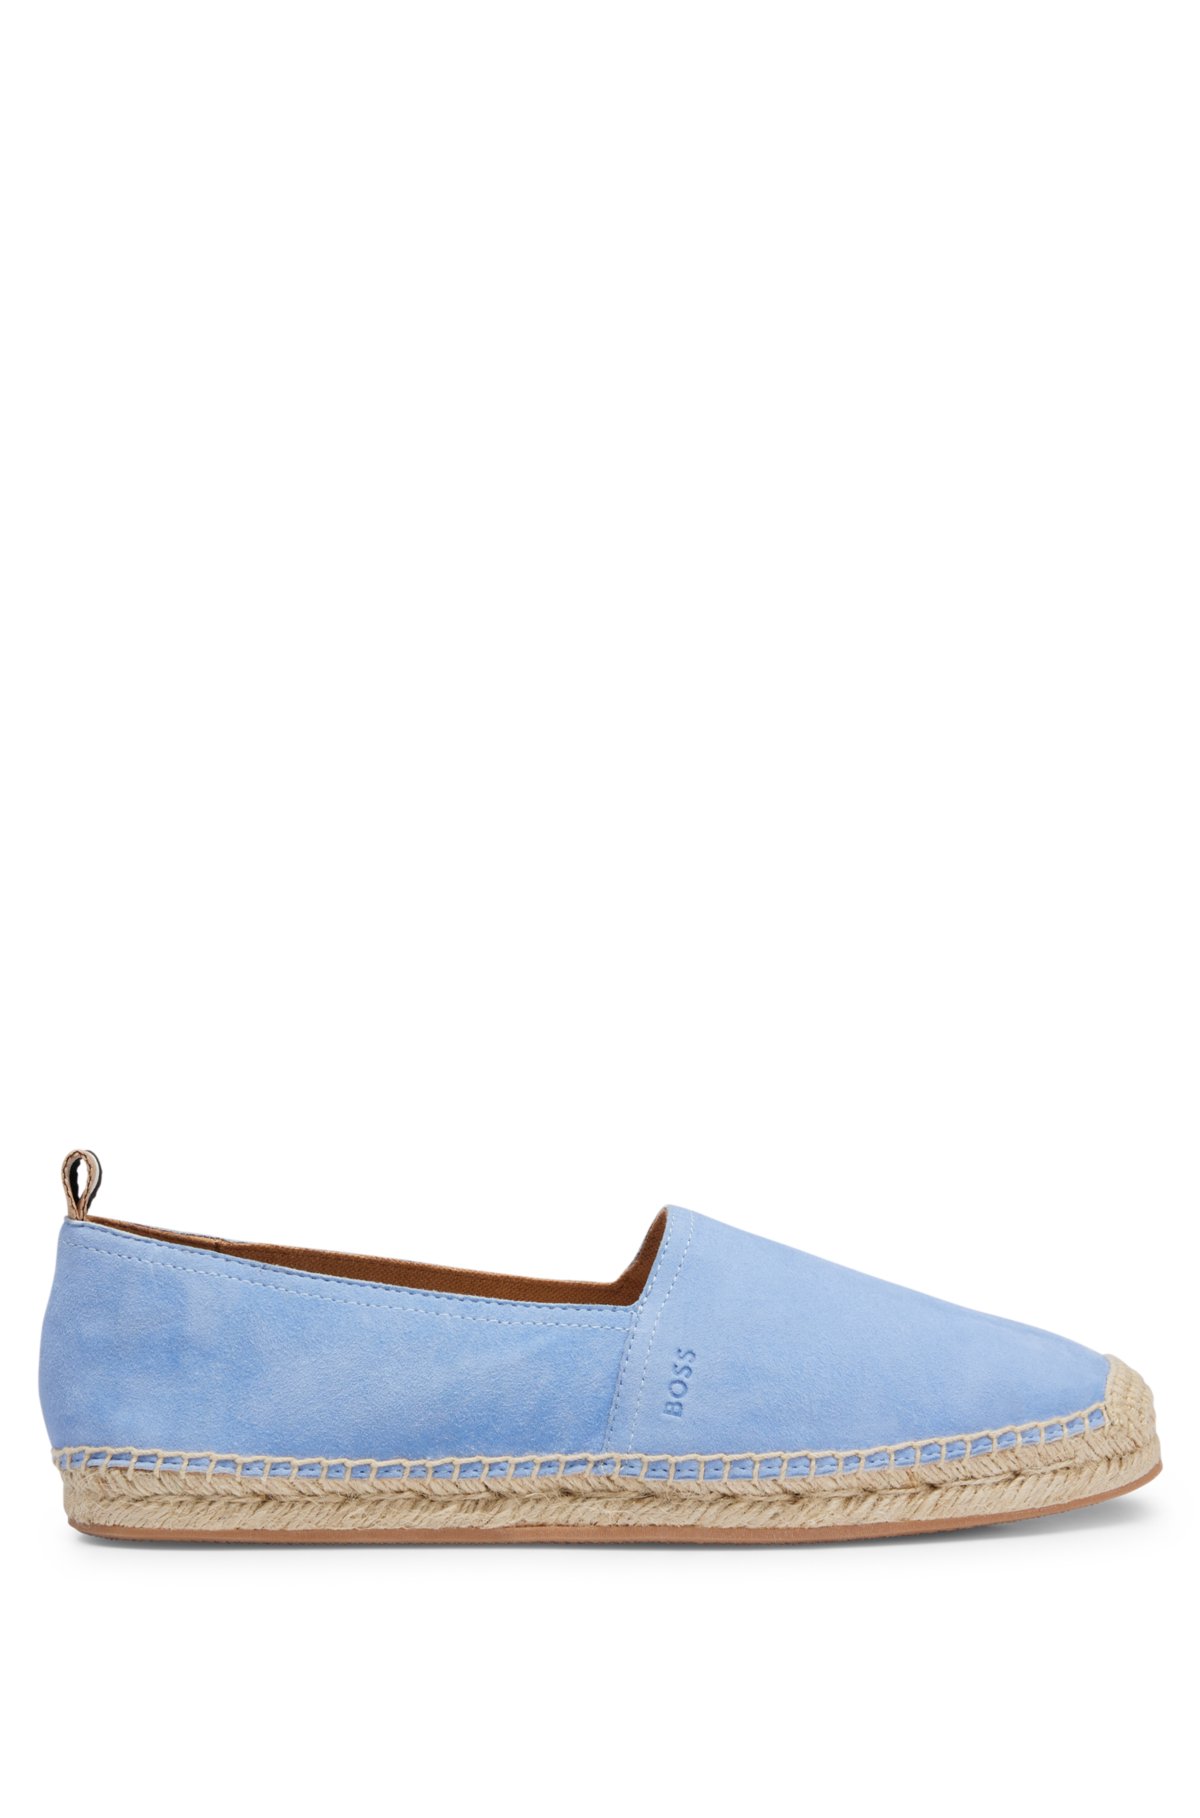 BOSS - Leather espadrilles with jute sole